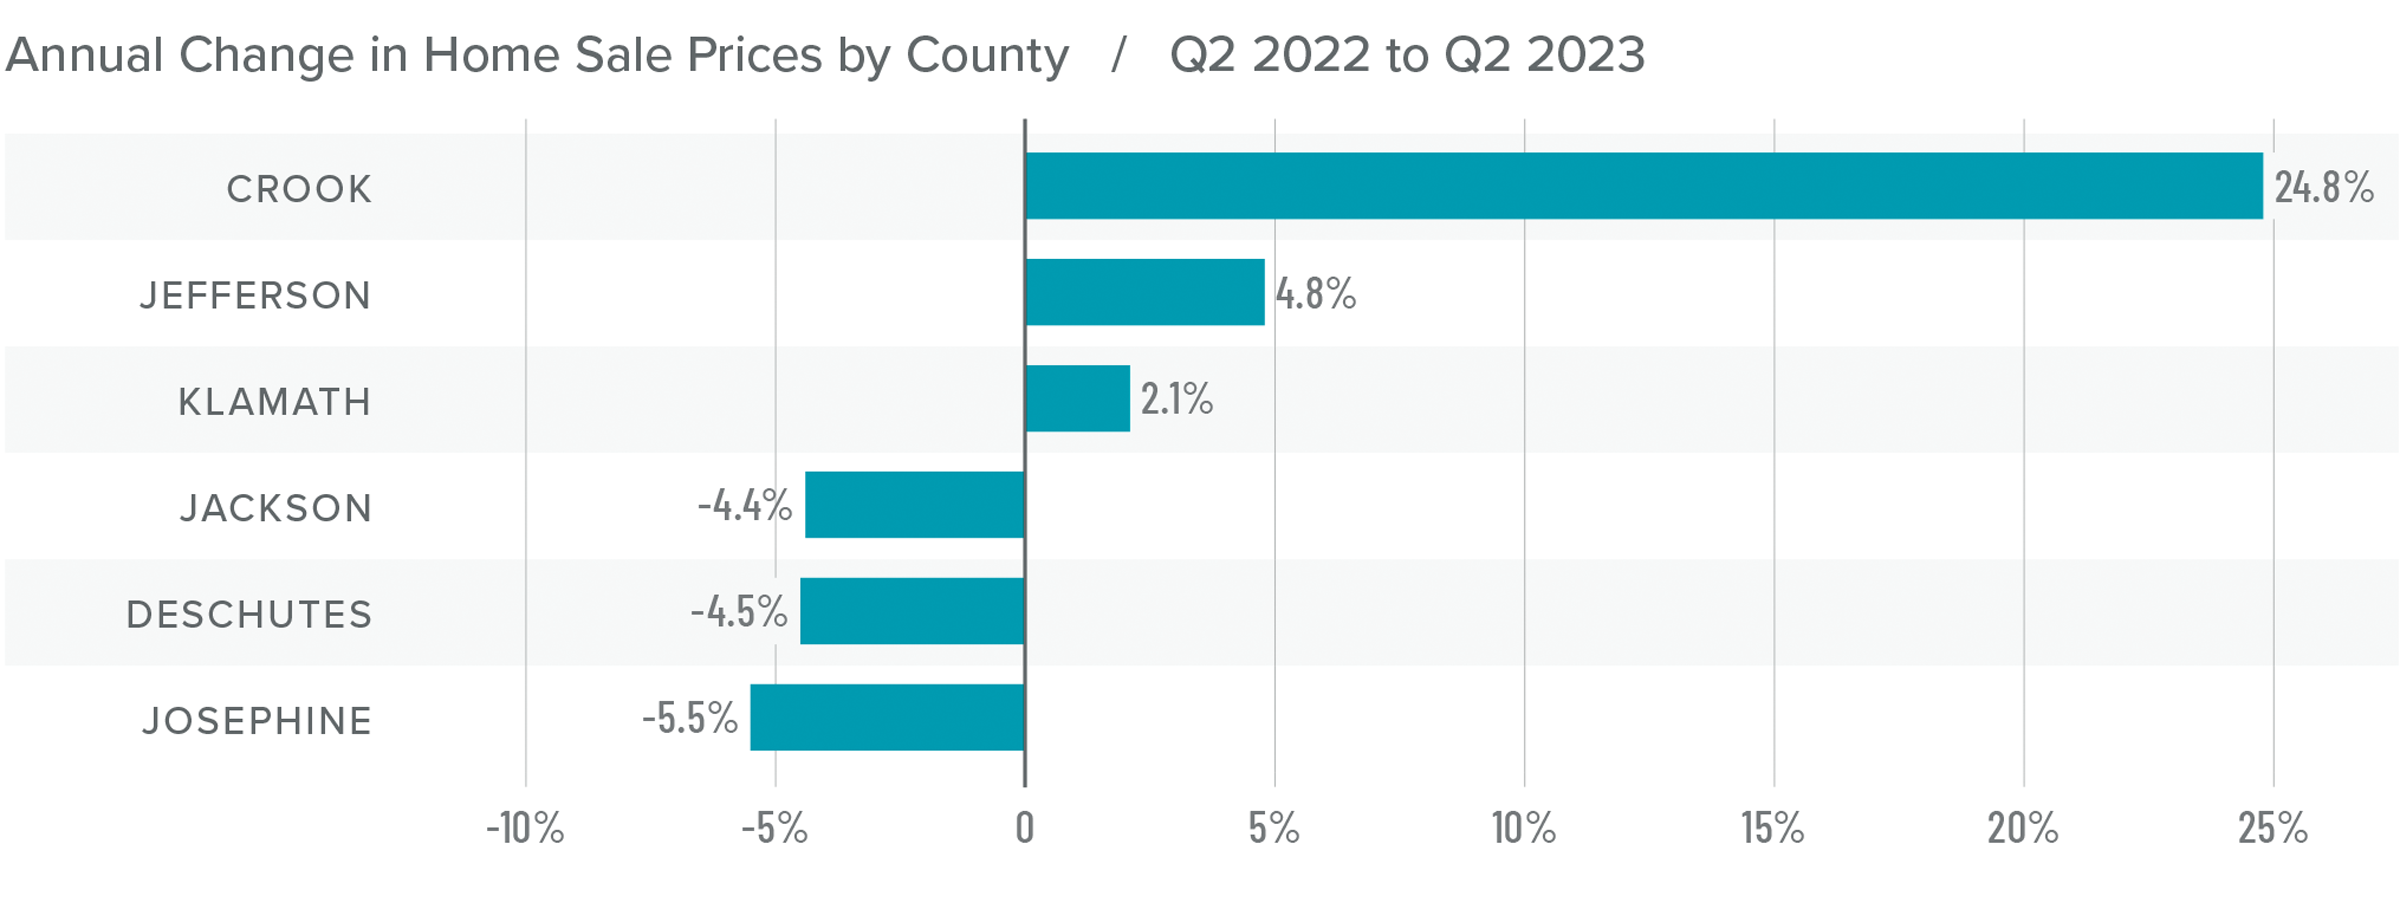 A bar graph showing the annual change in home sale prices by county in Central and Southern Oregon from Q2 2022 to Q2 2023. Crook County tops the list at 24.8%, while Josephine County had the greatest decline at -5.5%.